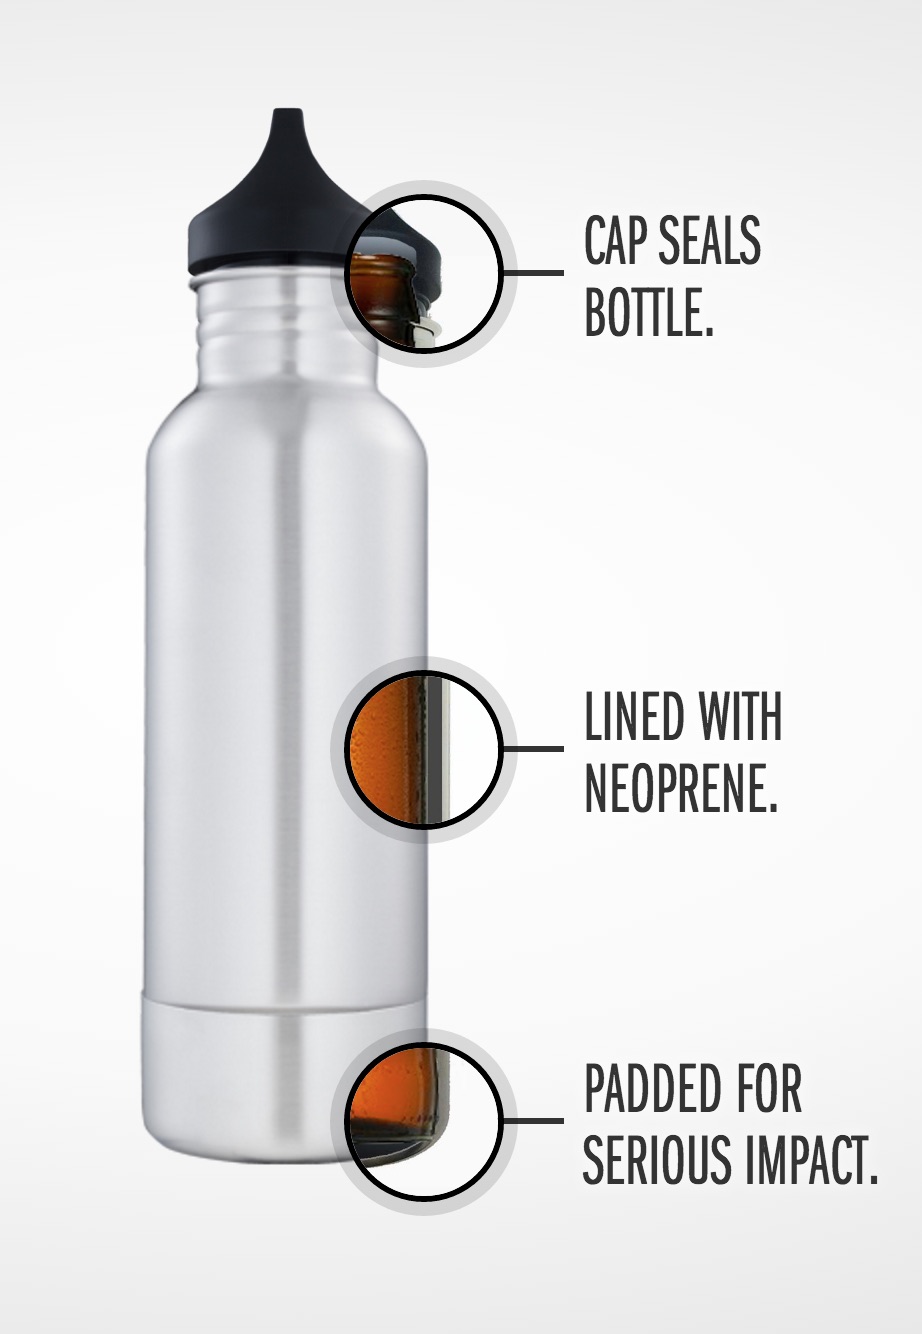 Win Two BottleKeepers! Free Contest Giveaway From Salt Strong.